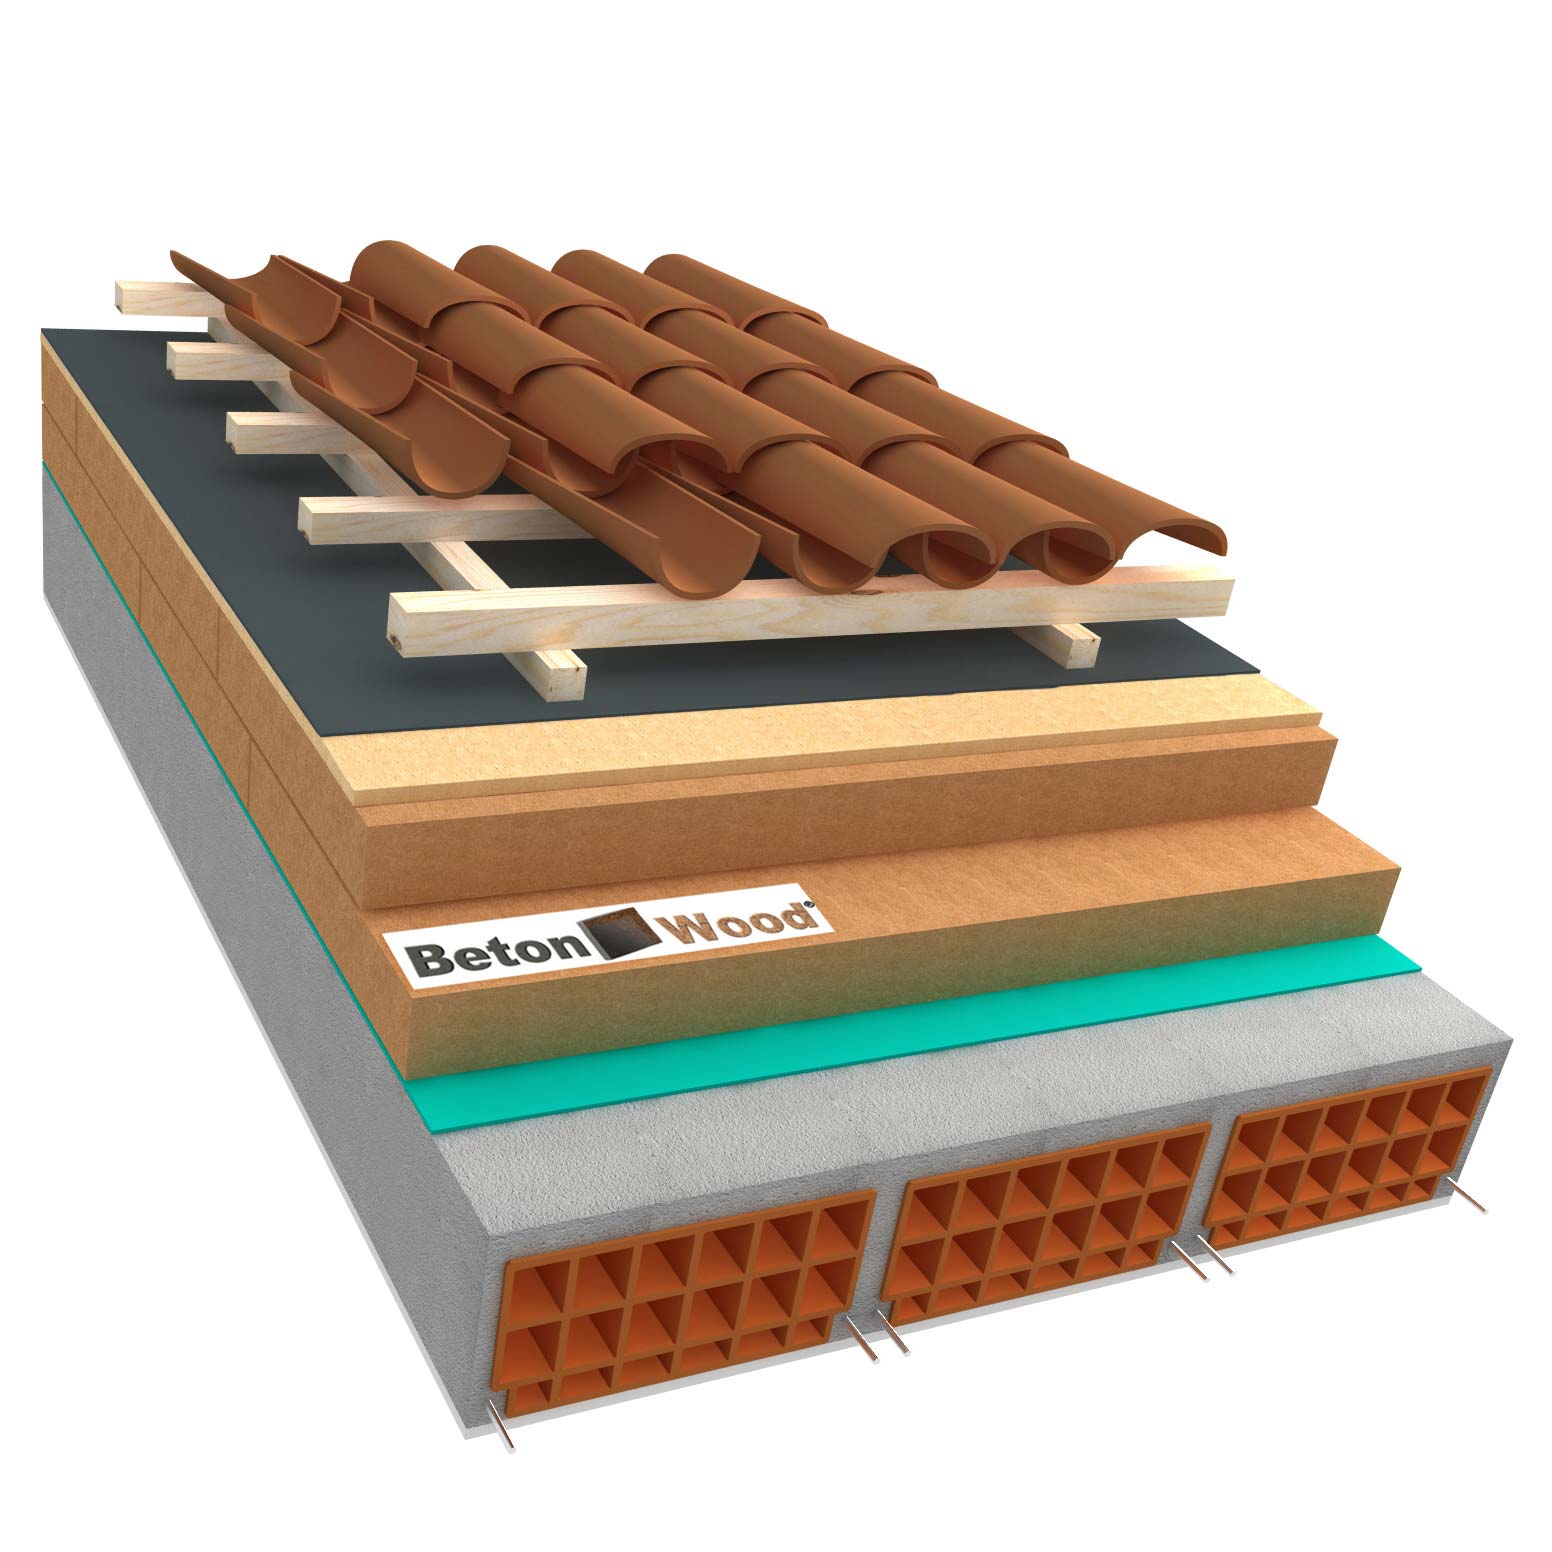 Ventilated roof with fiber wood Isorel and Therm SD on concrete